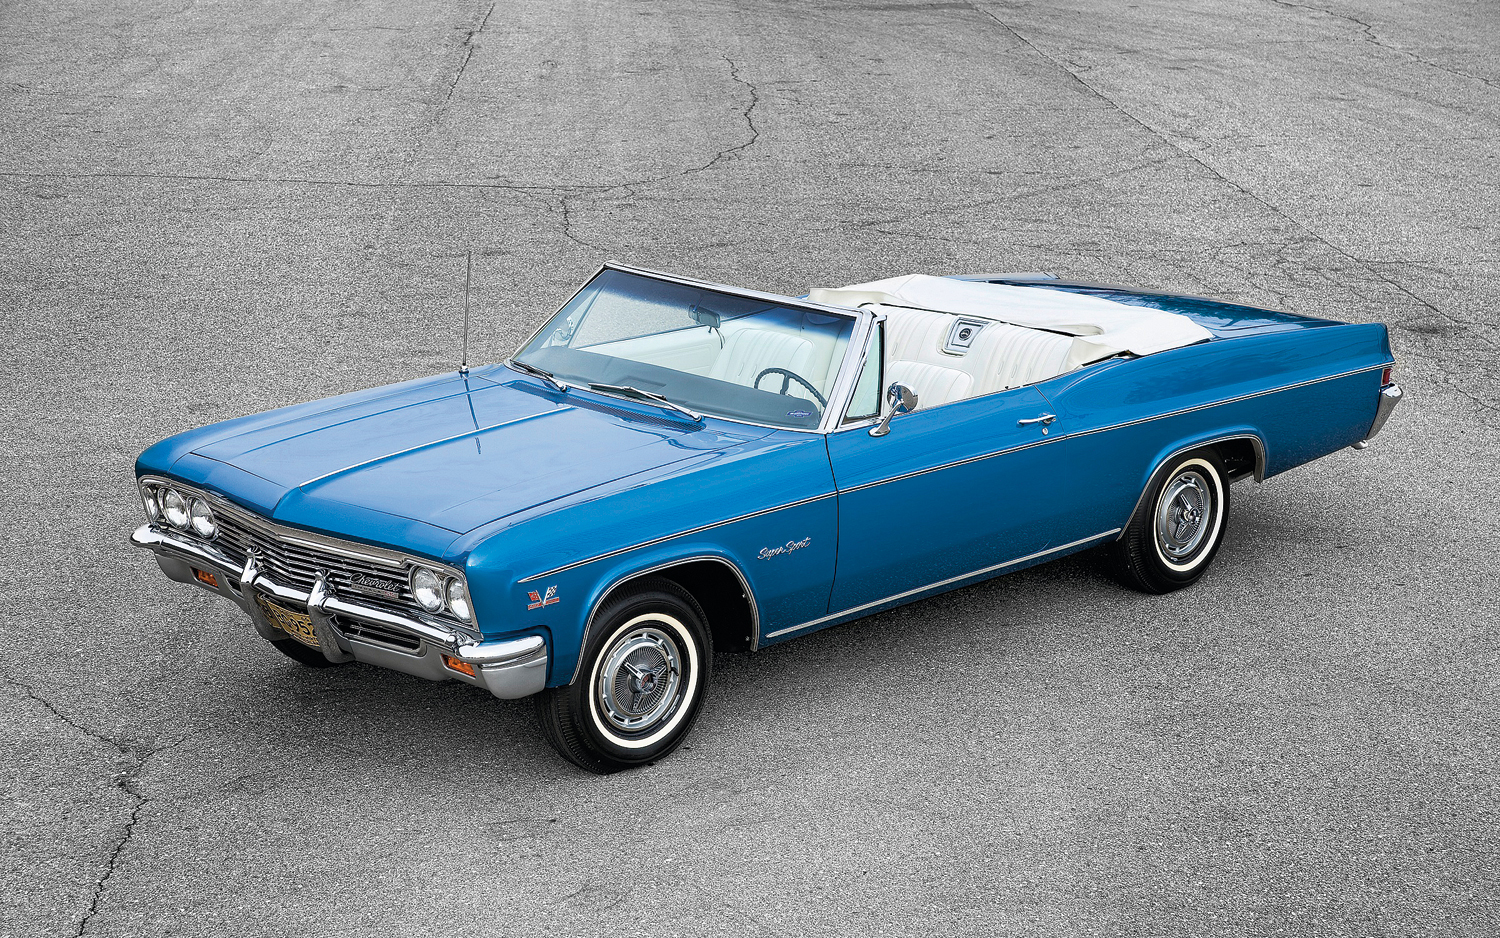 HQ Chevrolet Impala Convertible Wallpapers | File 1406.58Kb